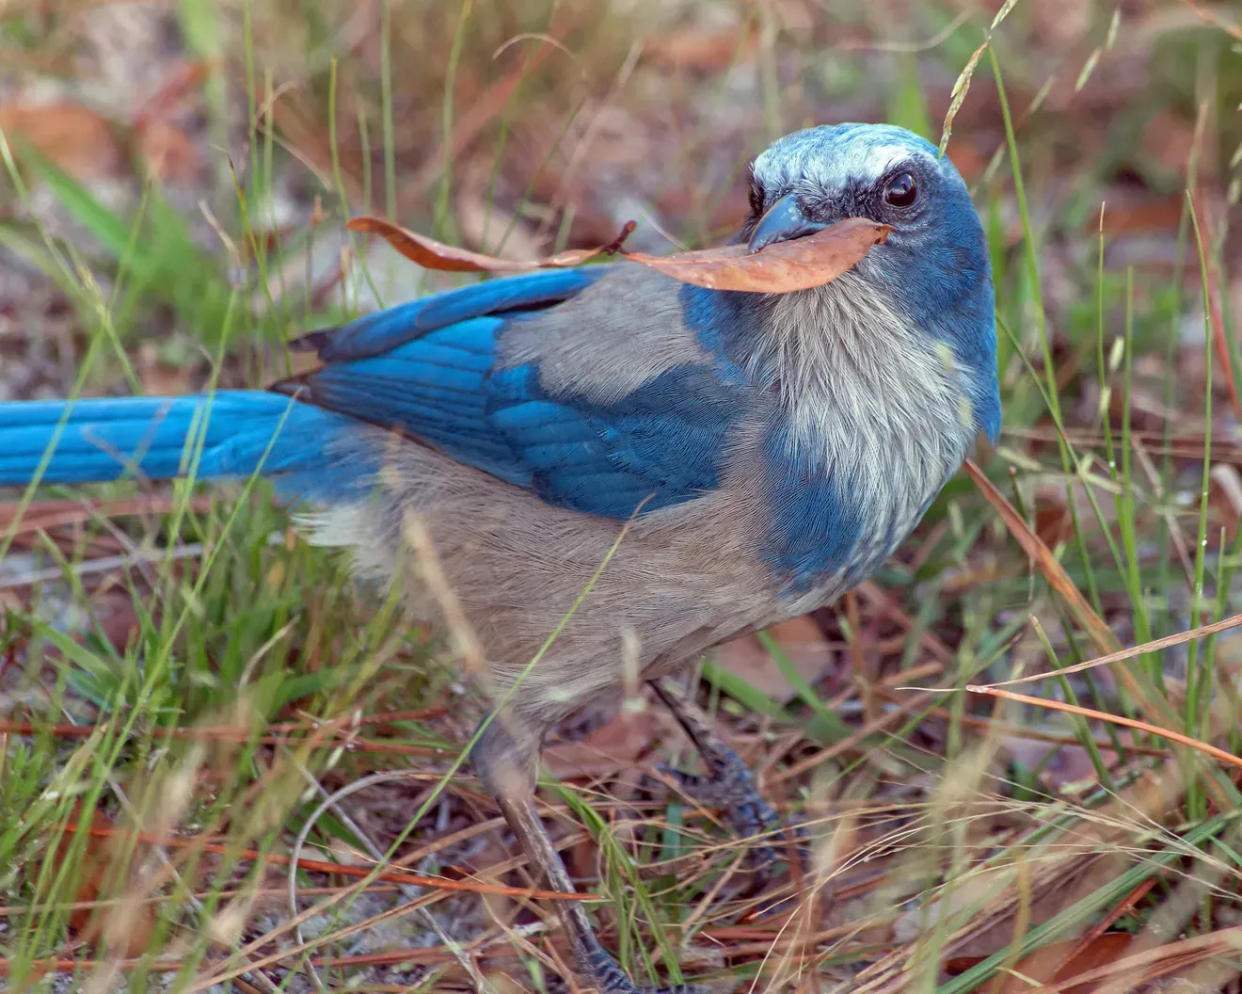 This Florida scrub-jay was photographed by James Rogers in North Port. The Environmental Conservancy of North Port closed on the purchase of four lots in the Harbor Heights neighborhood in Charlotte County that will be preserved as habitat for native species.